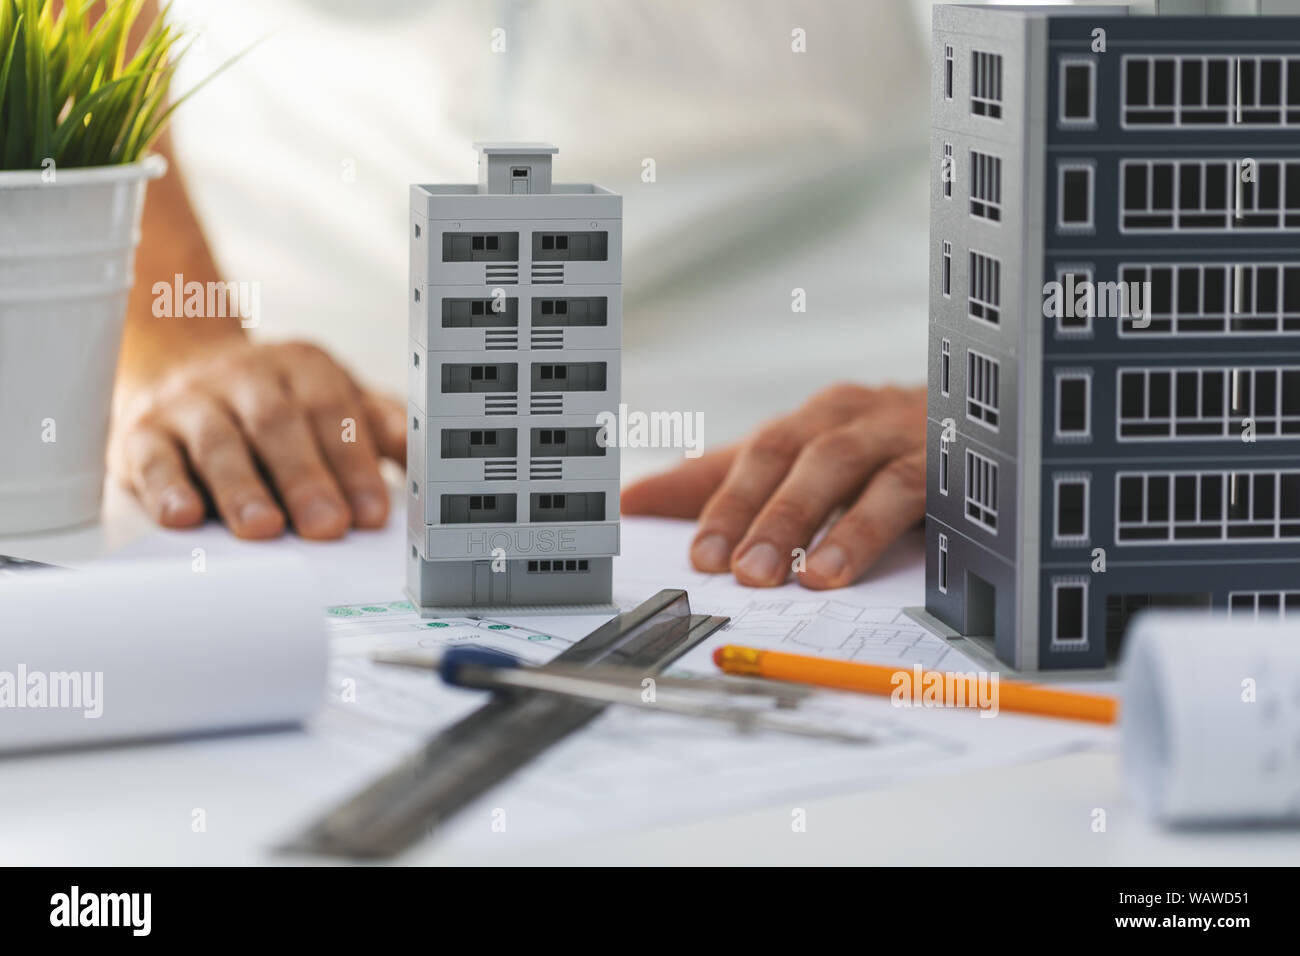 civil engineering housing development - house scale models and blueprints on the desk in office Stock Photo